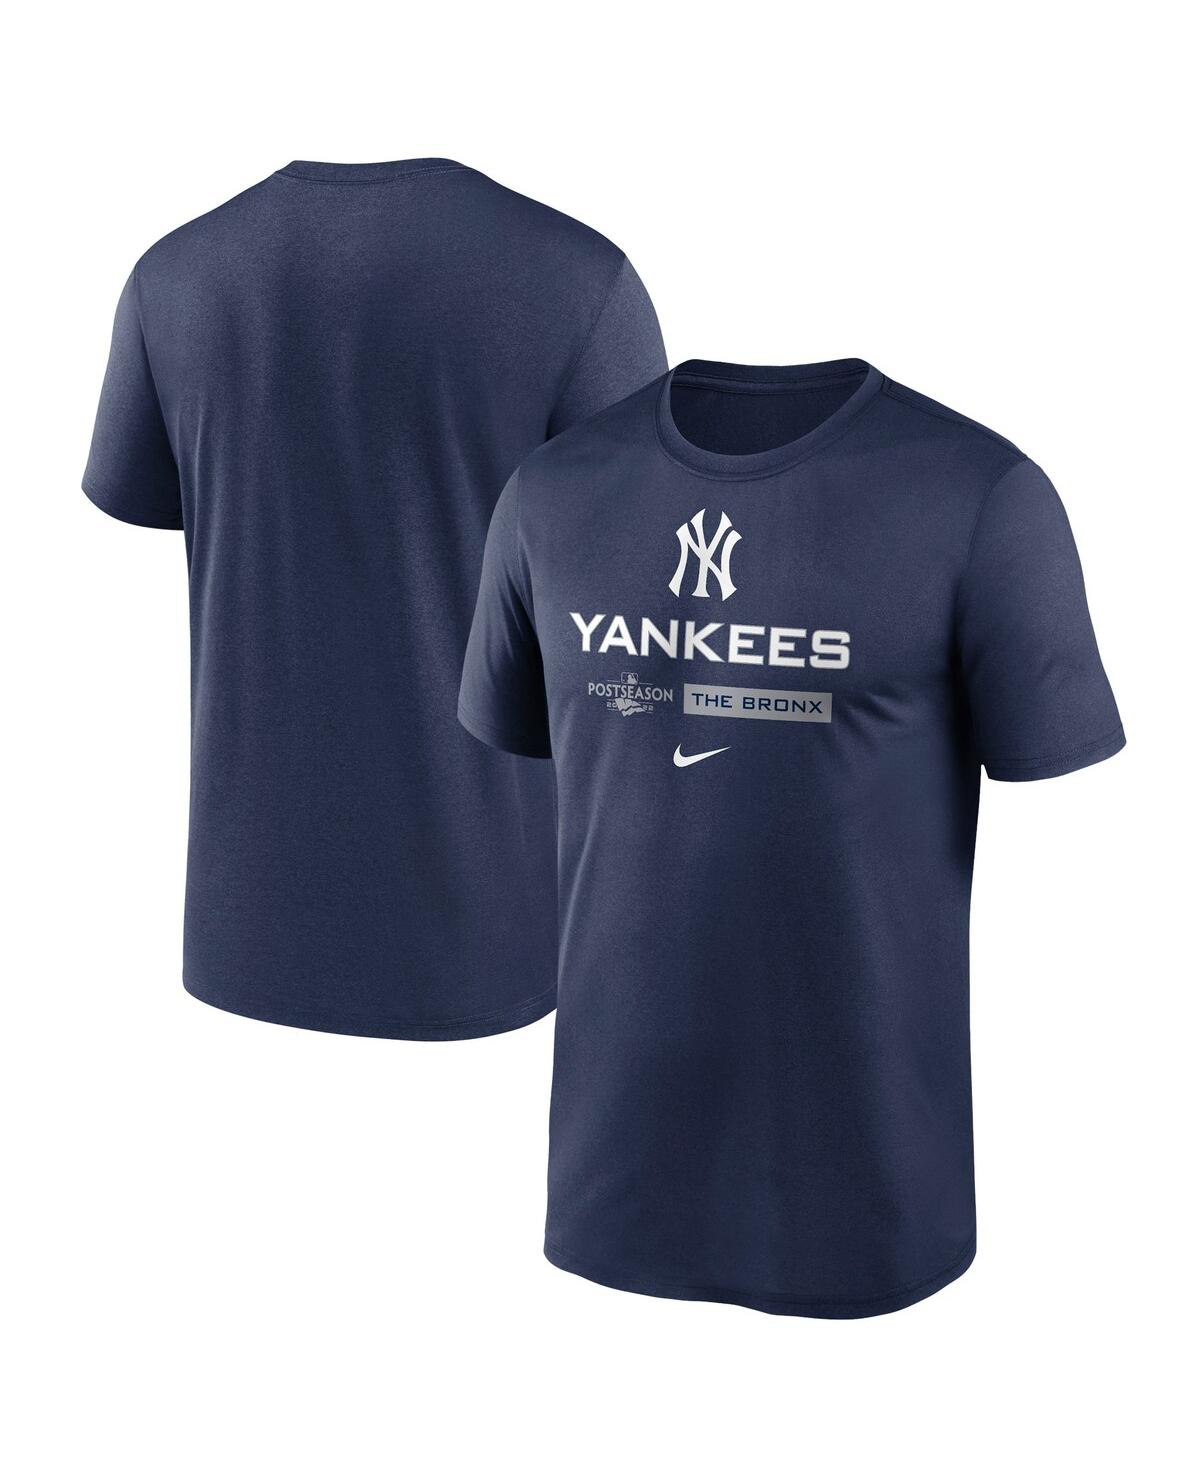 Men's Nike Navy New York Yankees 2022 Postseason Authentic Collection Dugout T-shirt